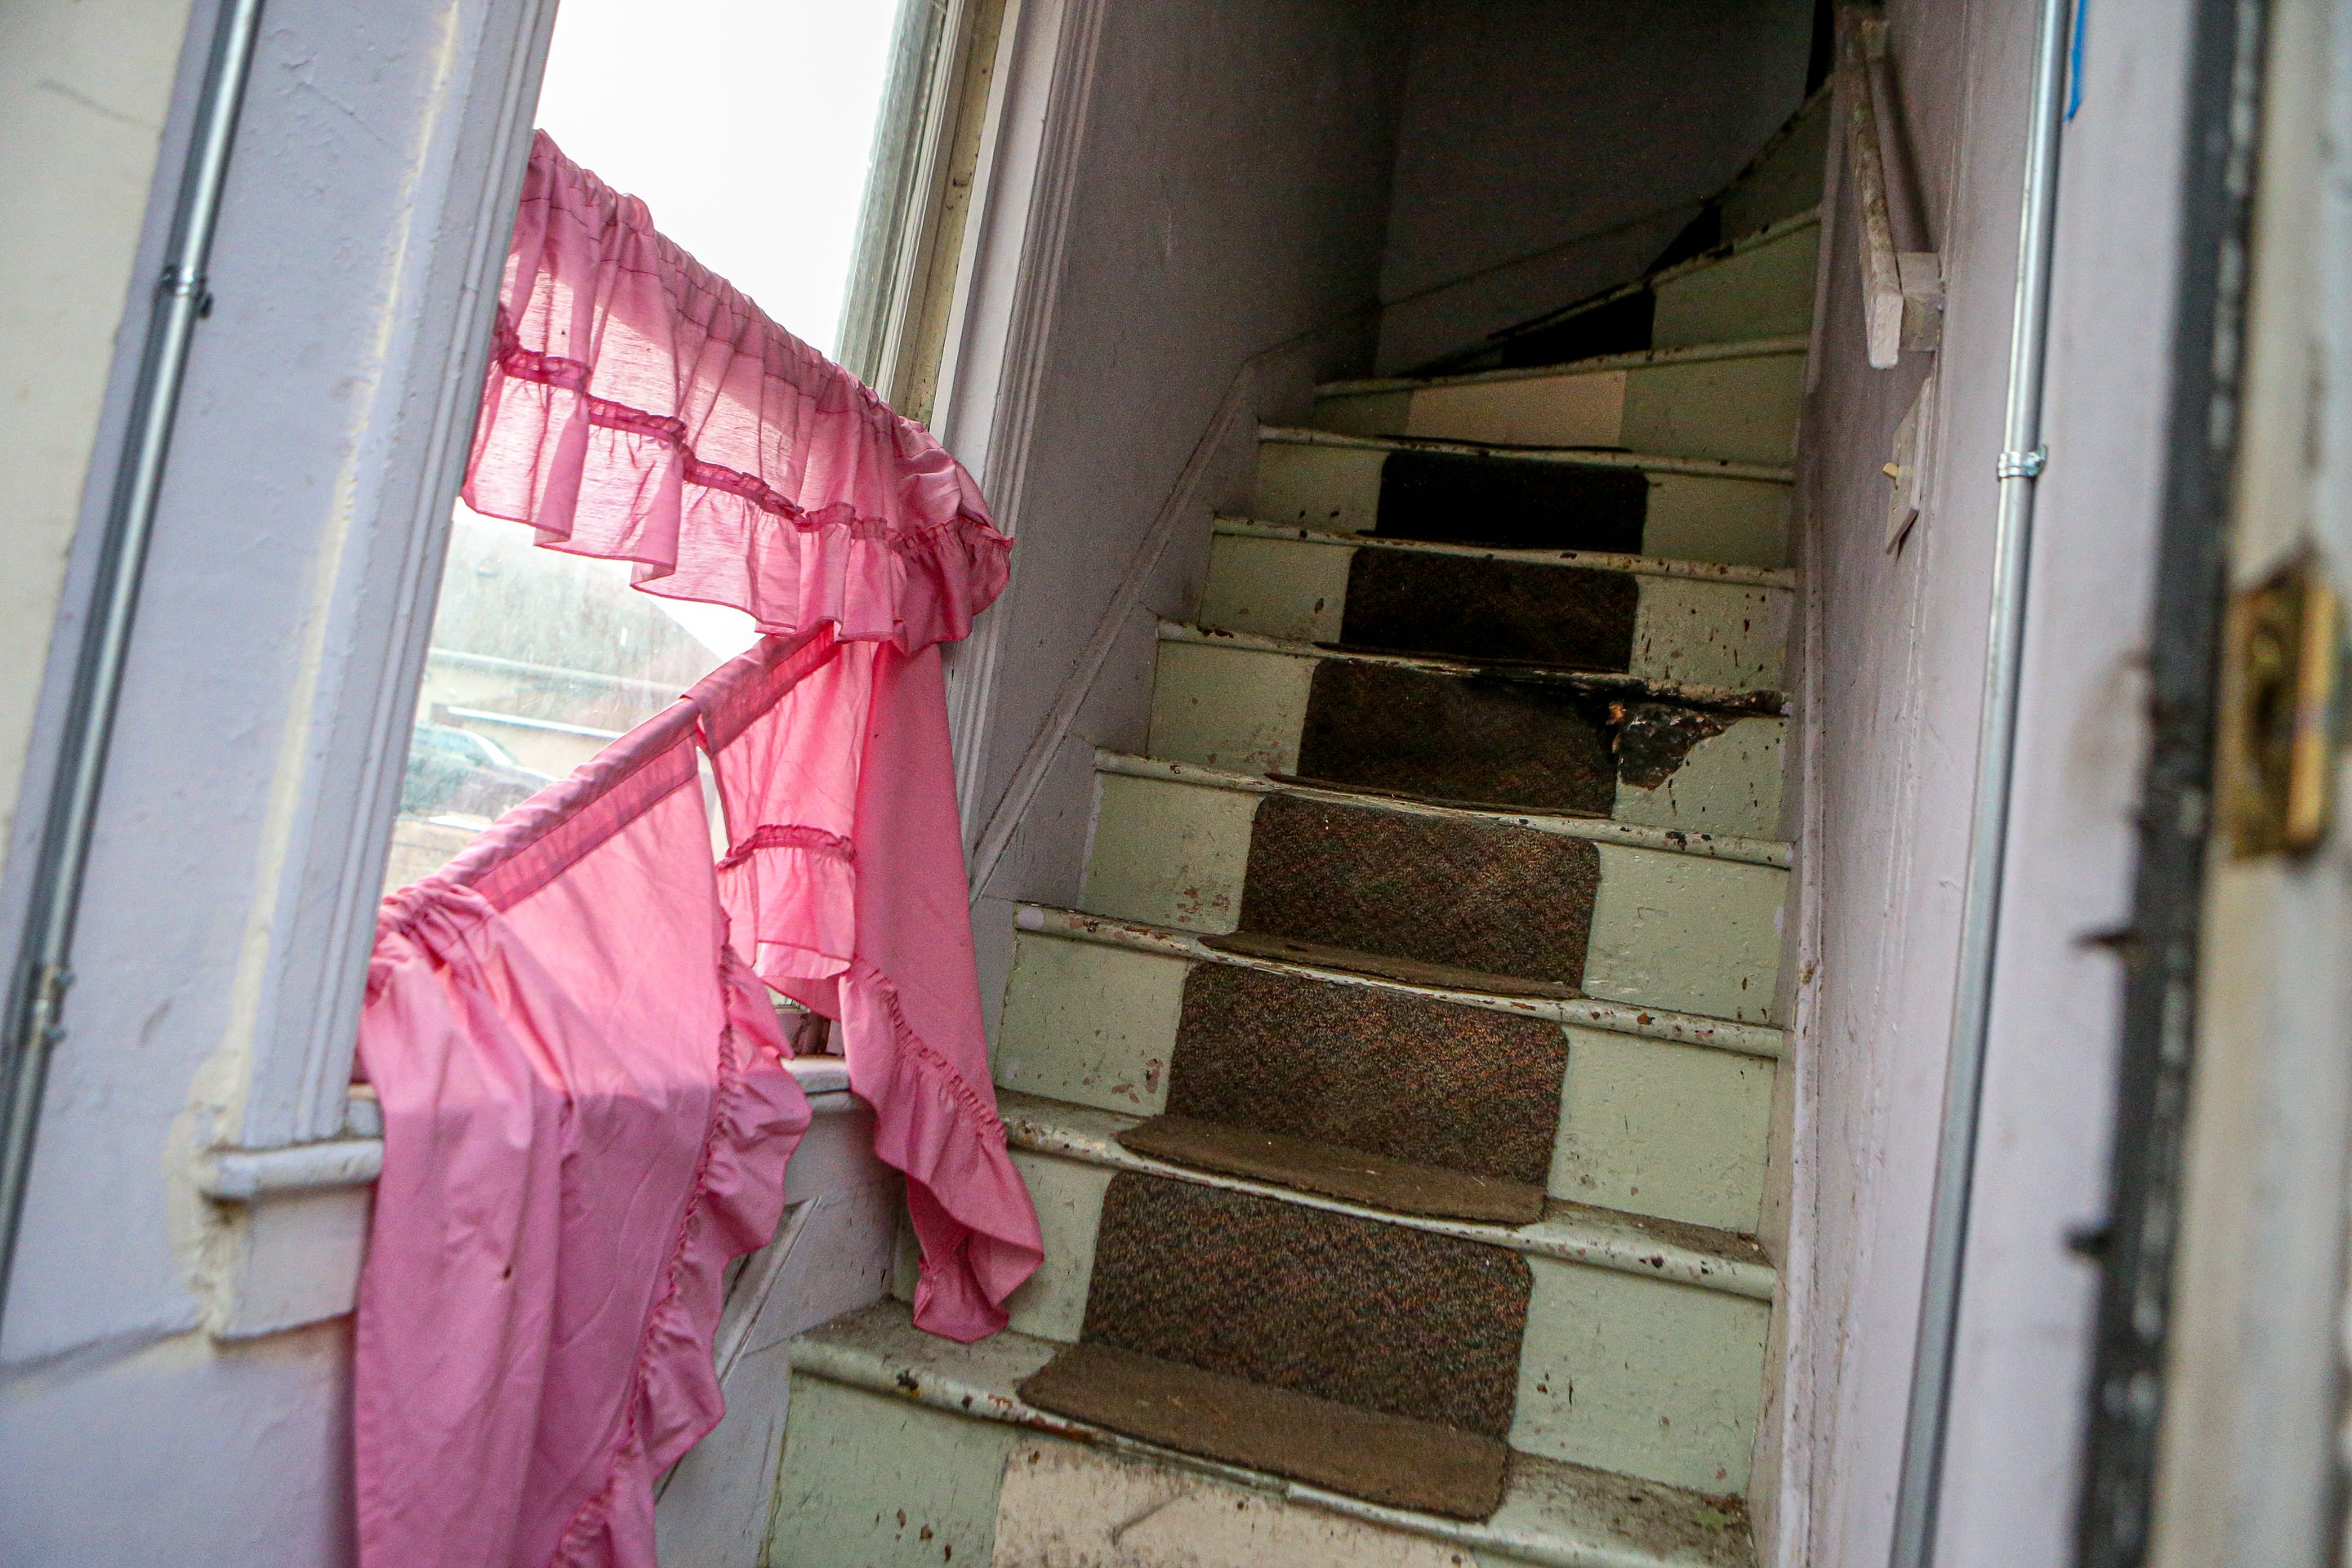 The stairway where Black left a trail of blood while heading to his room after injuring his leg.